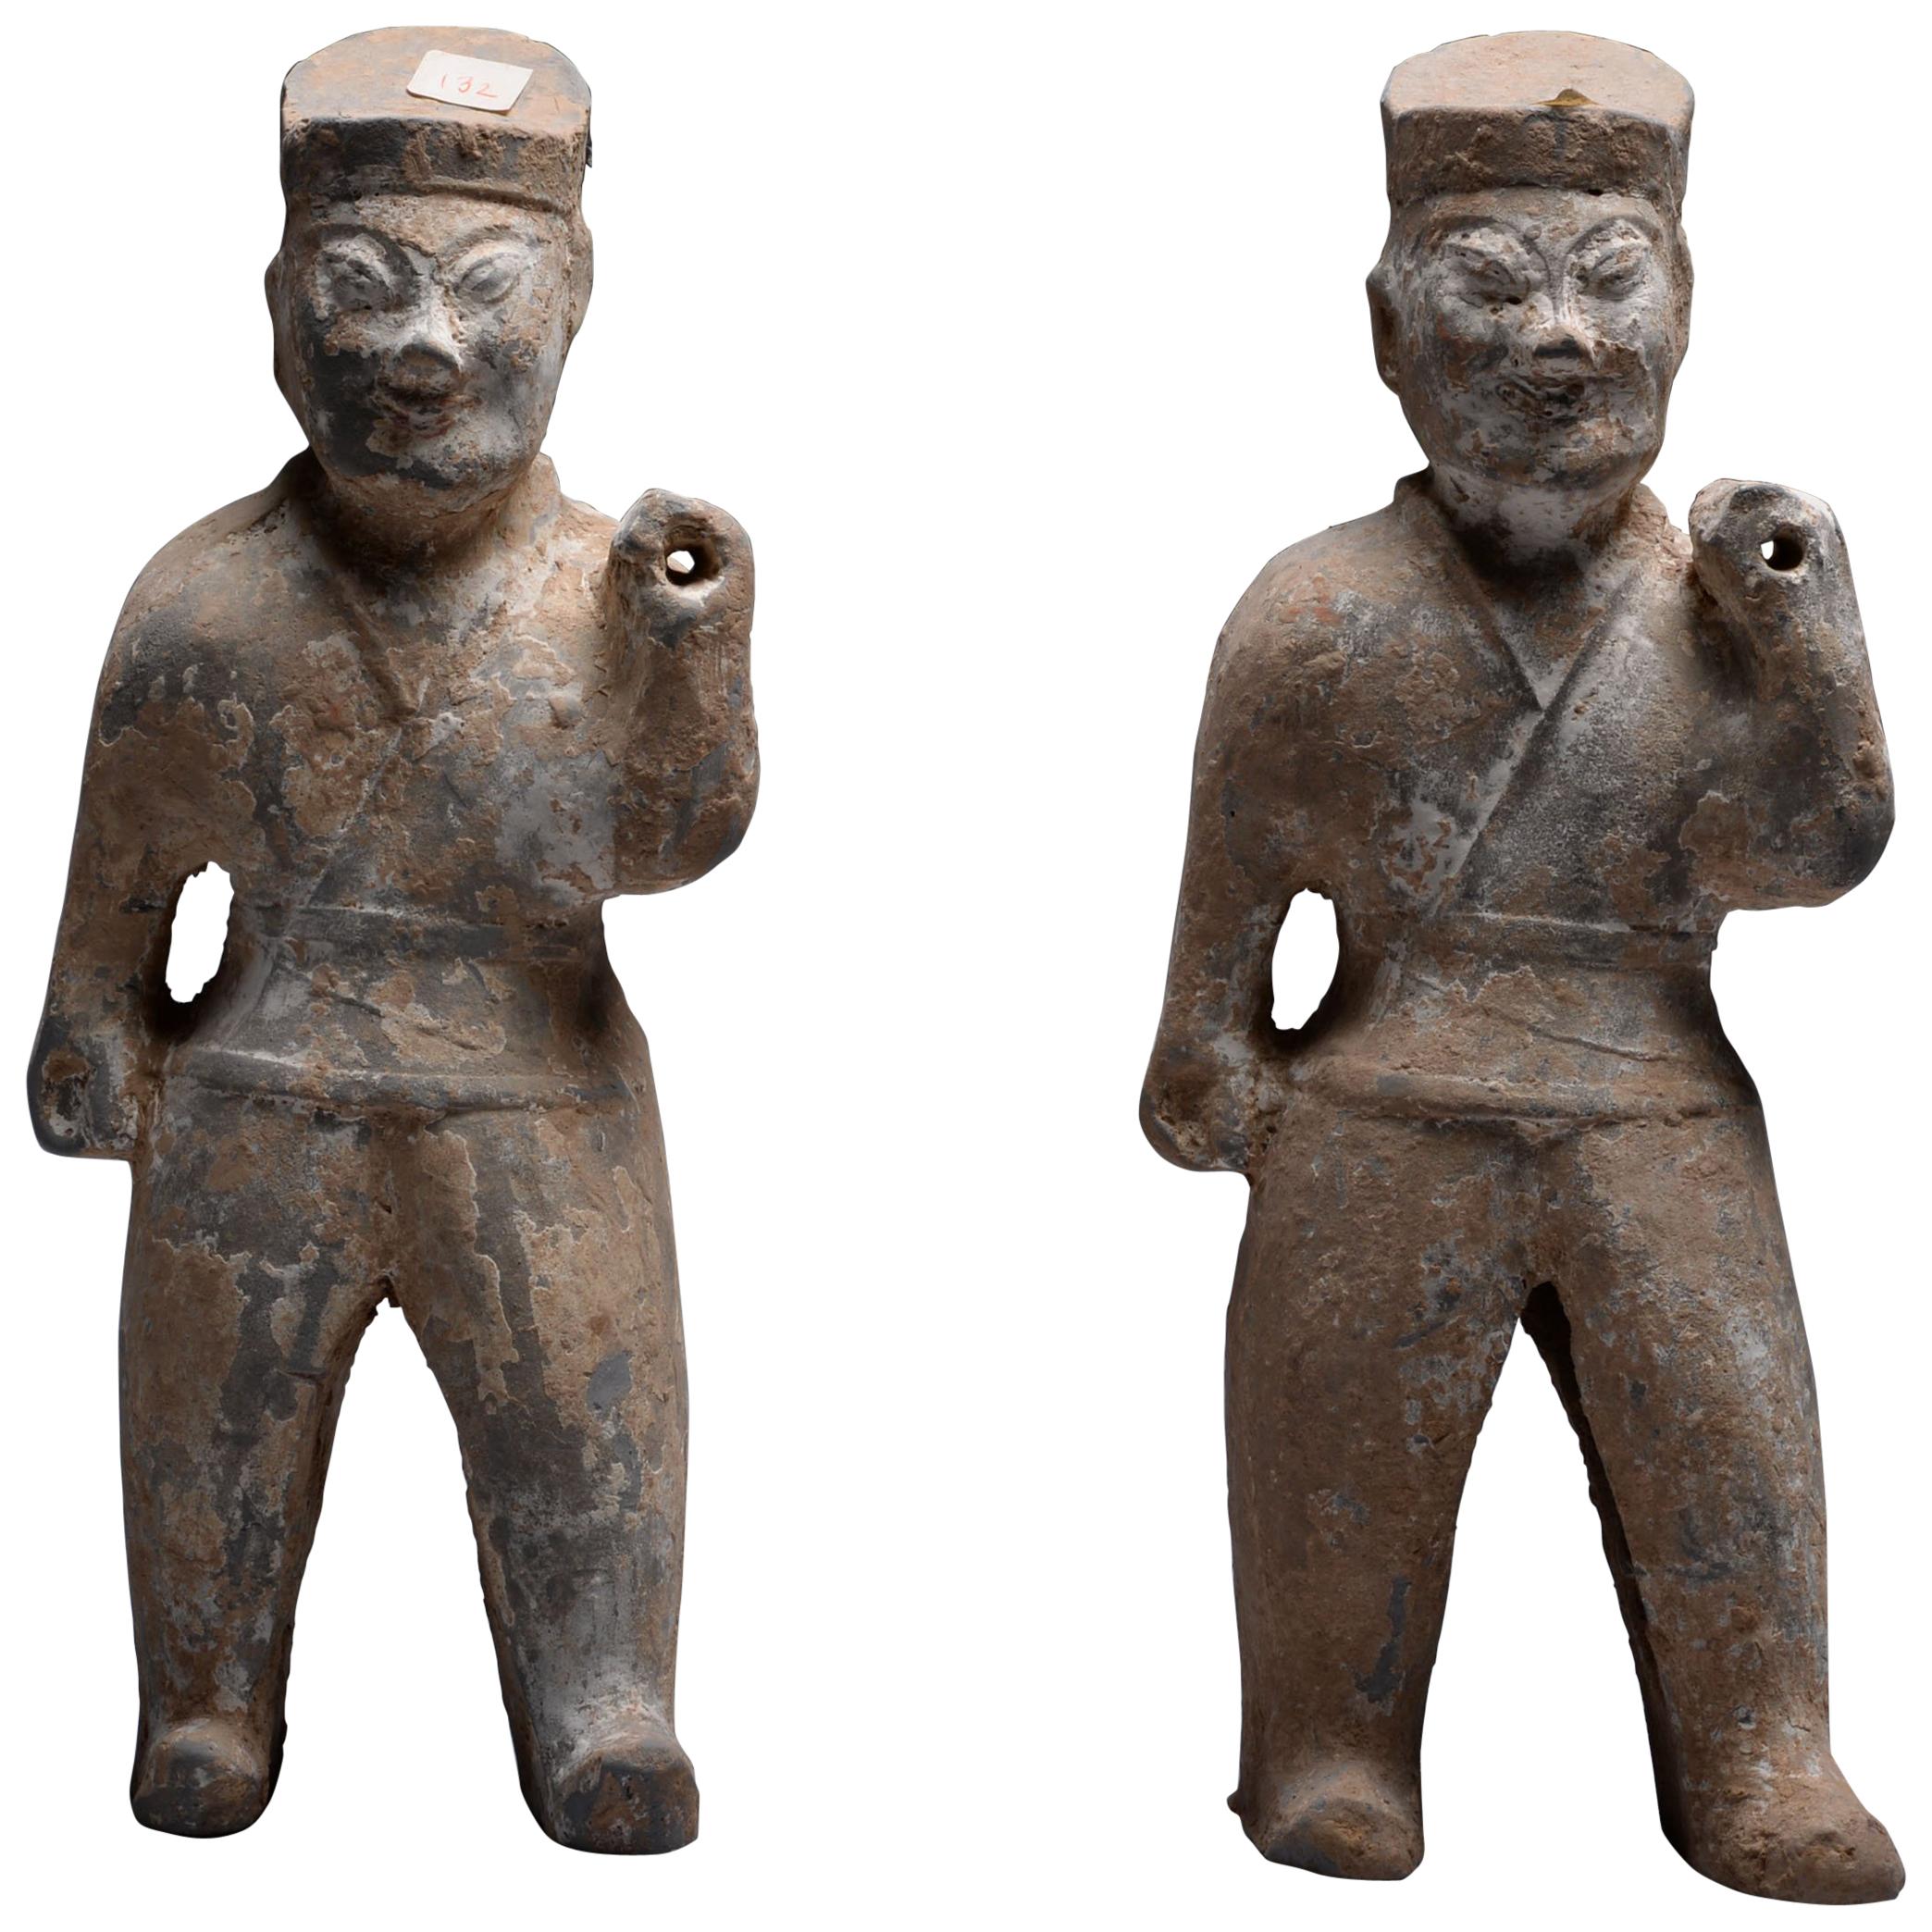 Ancient Chinese Terracotta Warriors, 265 AD